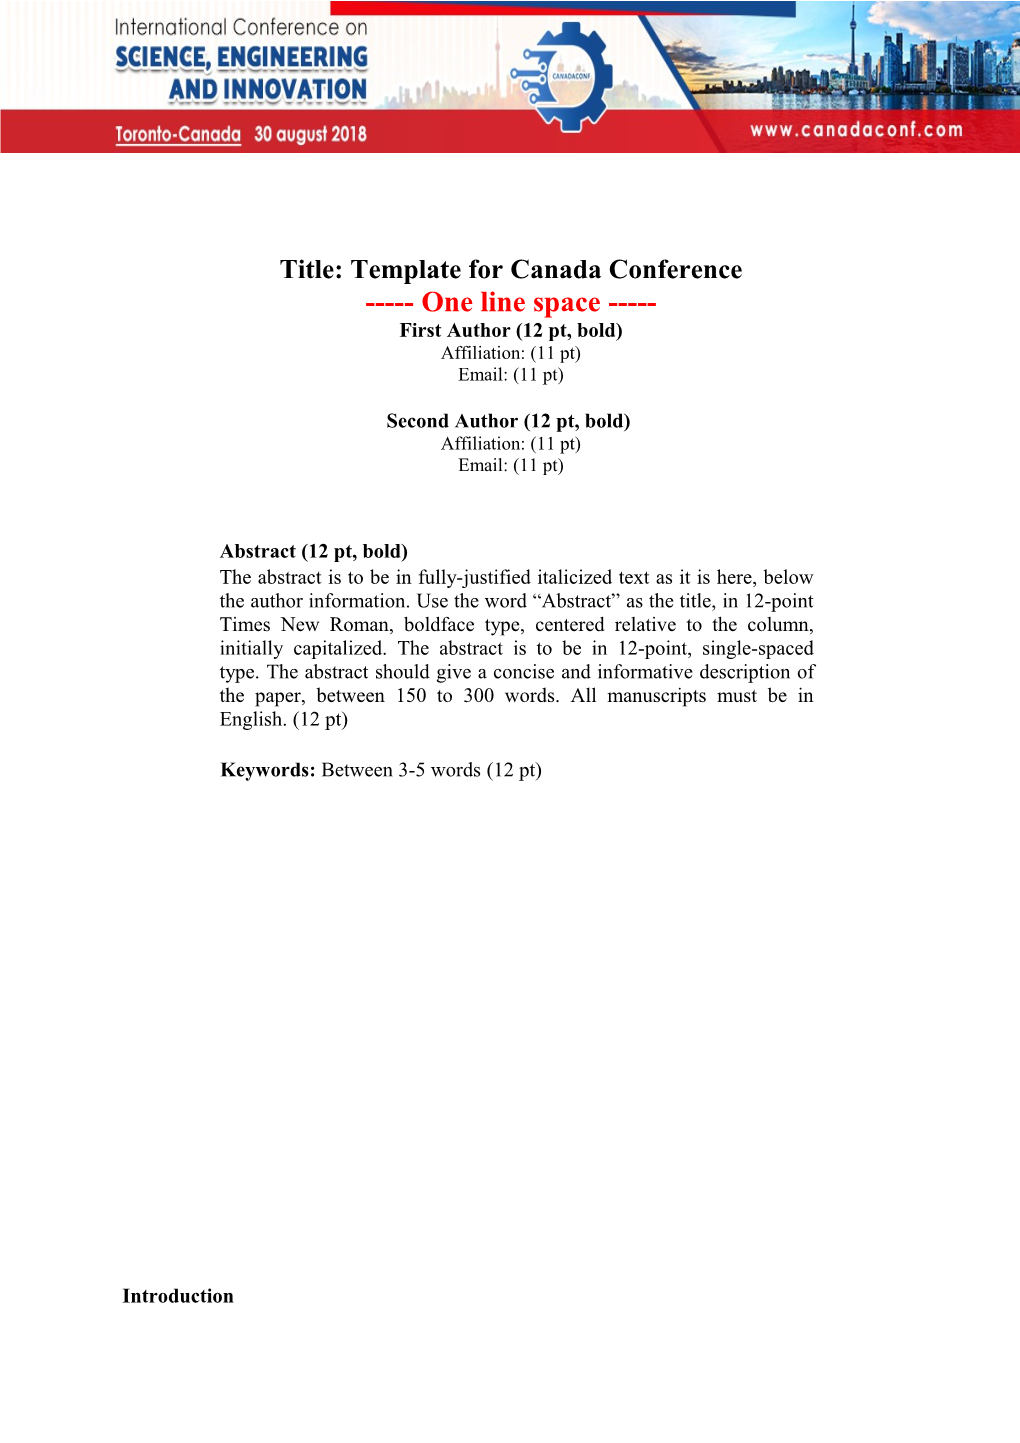 Title: Template for Canada Conference